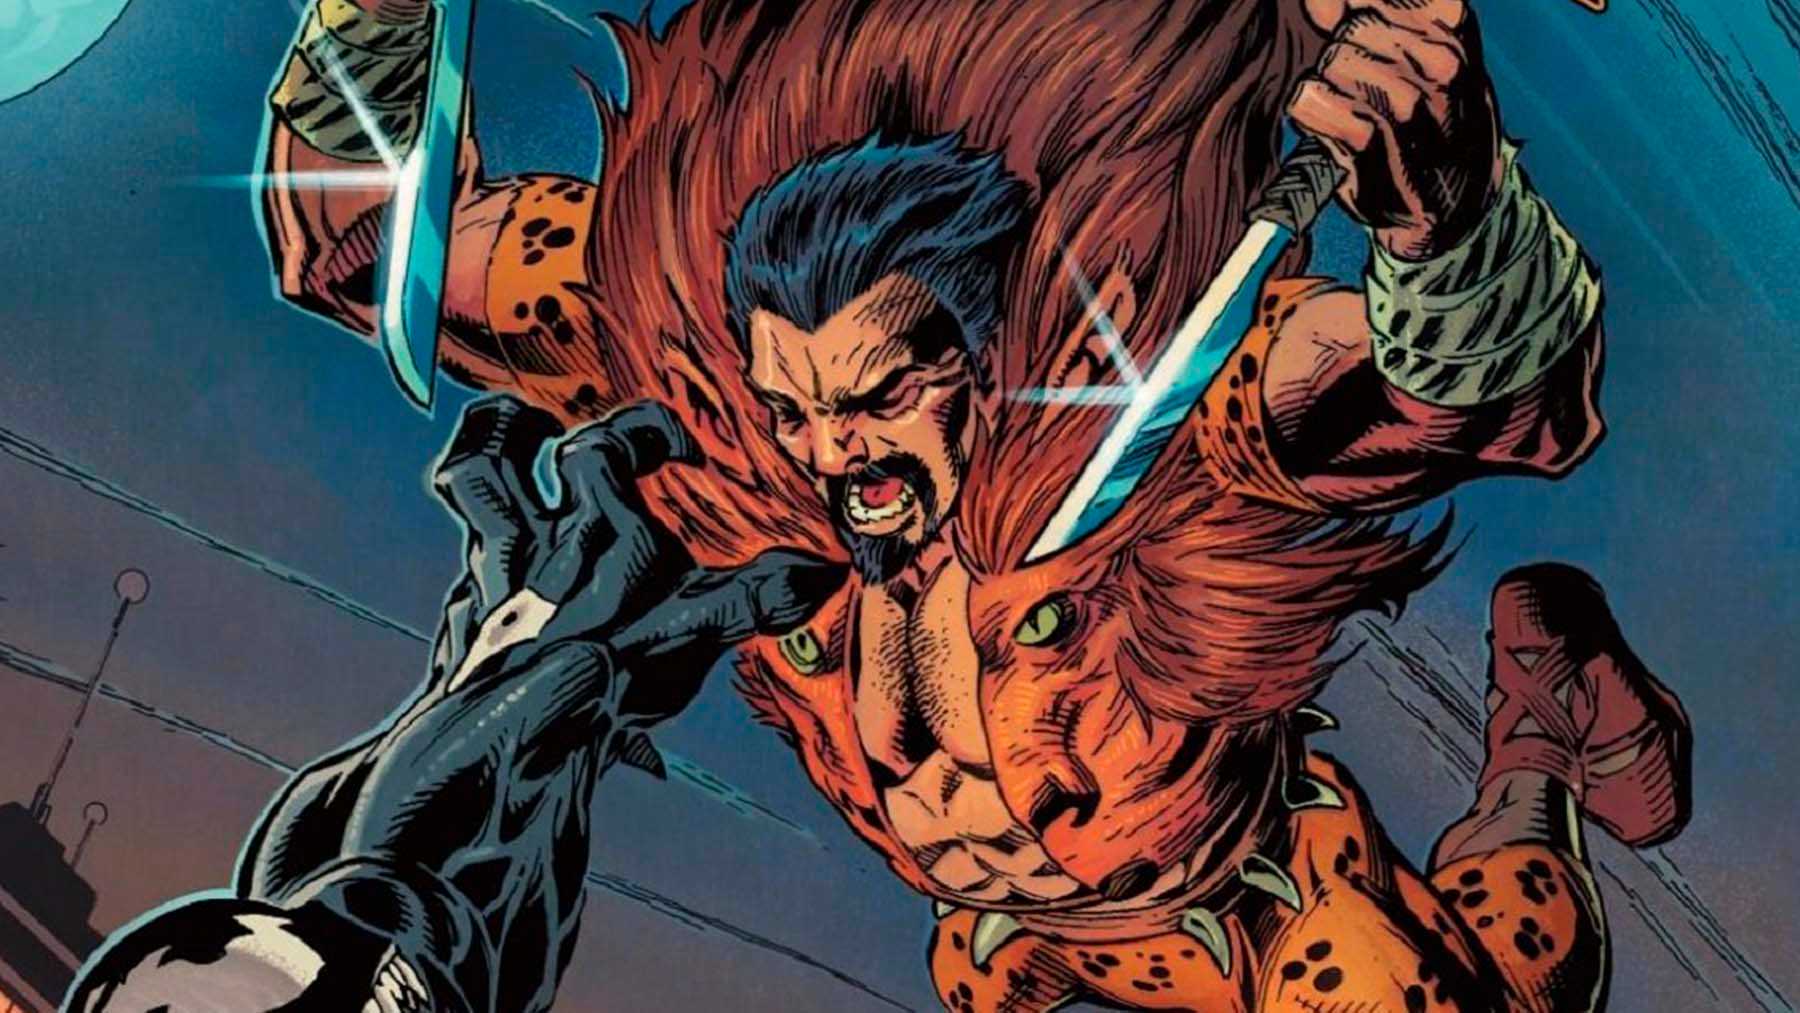 Sony's upcoming Spider-Man spinoff Kraven the Hunter star Aaron Taylor-Johnson the character will be different from the comics